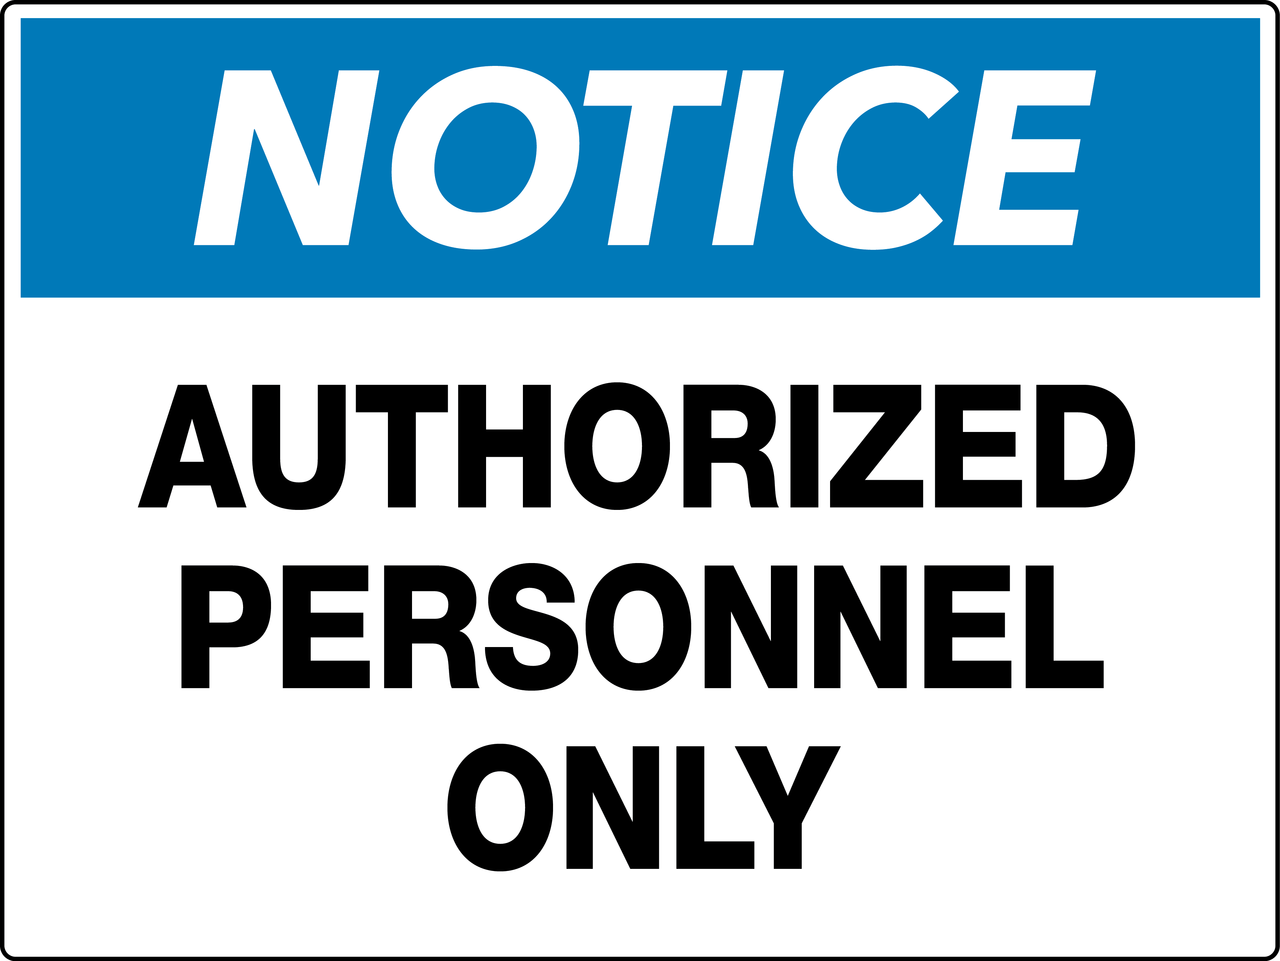 Authorized Personnel Meaning